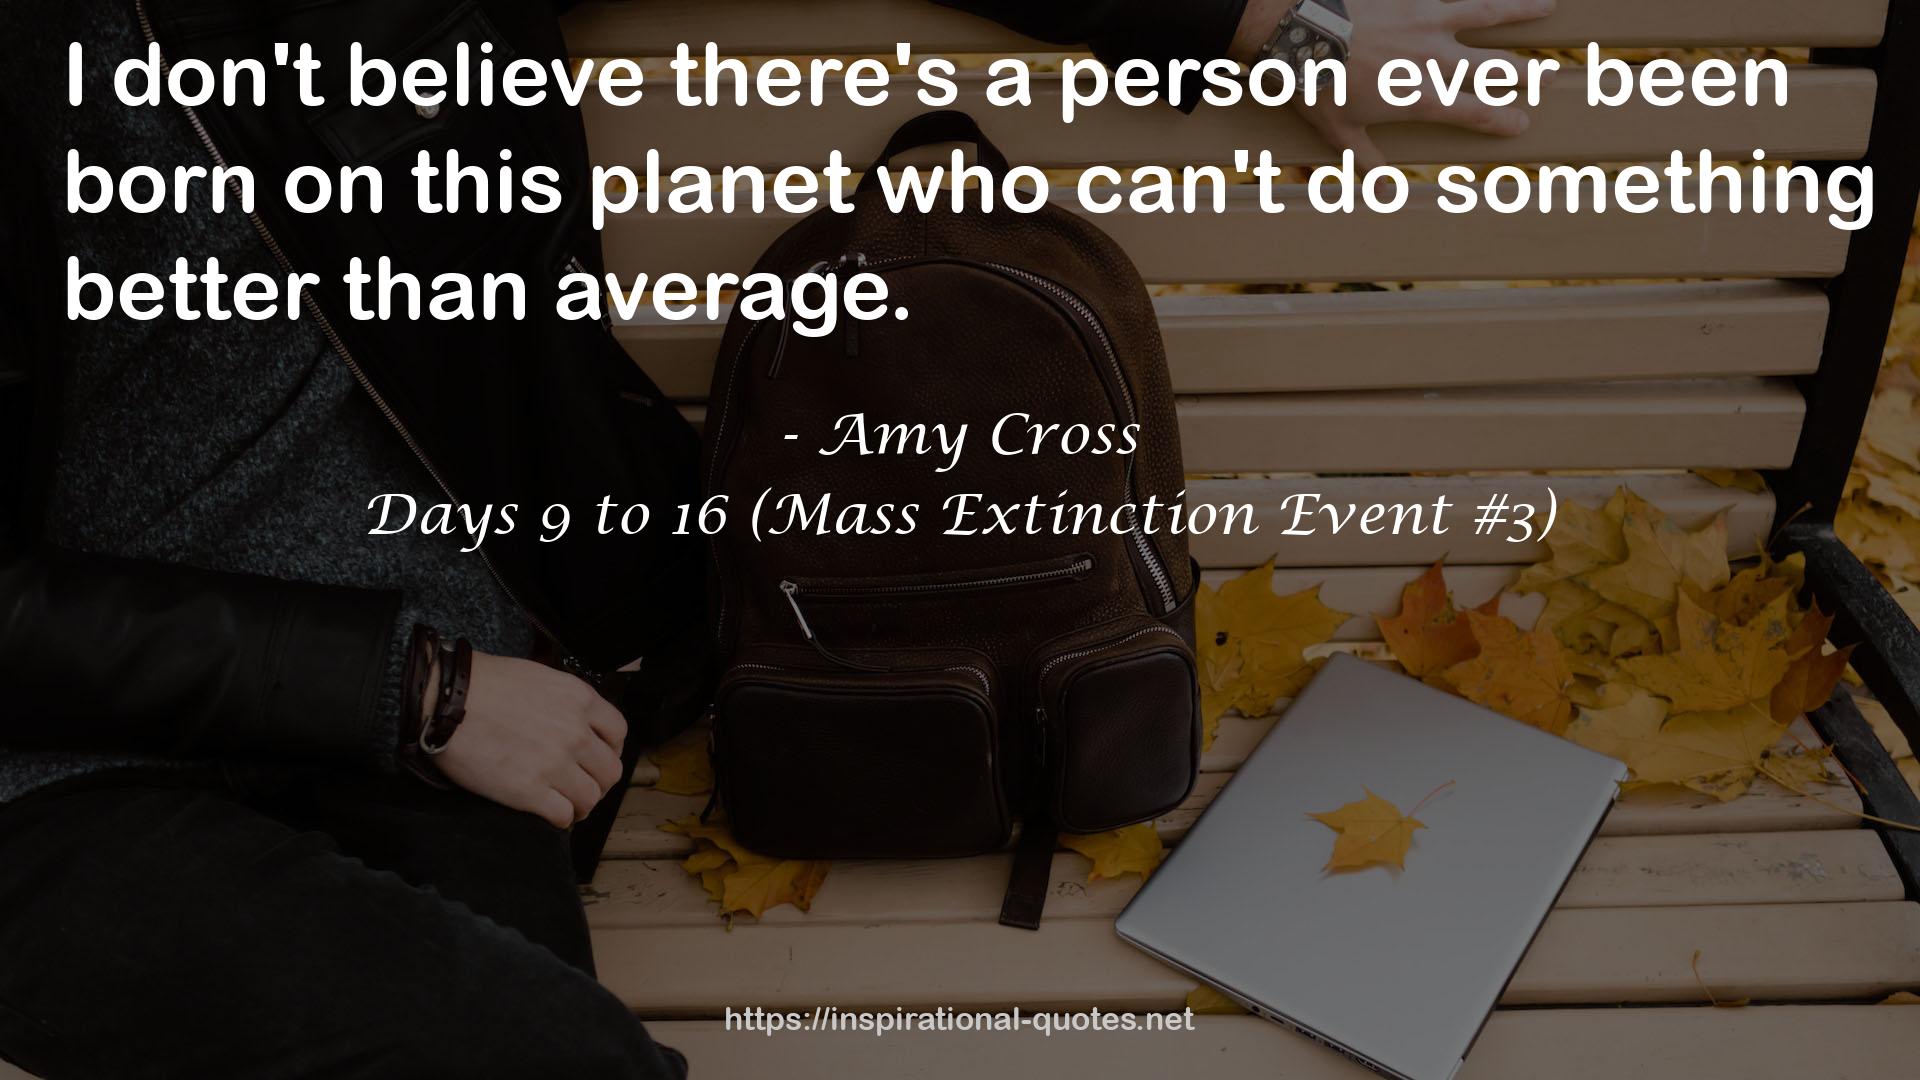 Amy Cross QUOTES